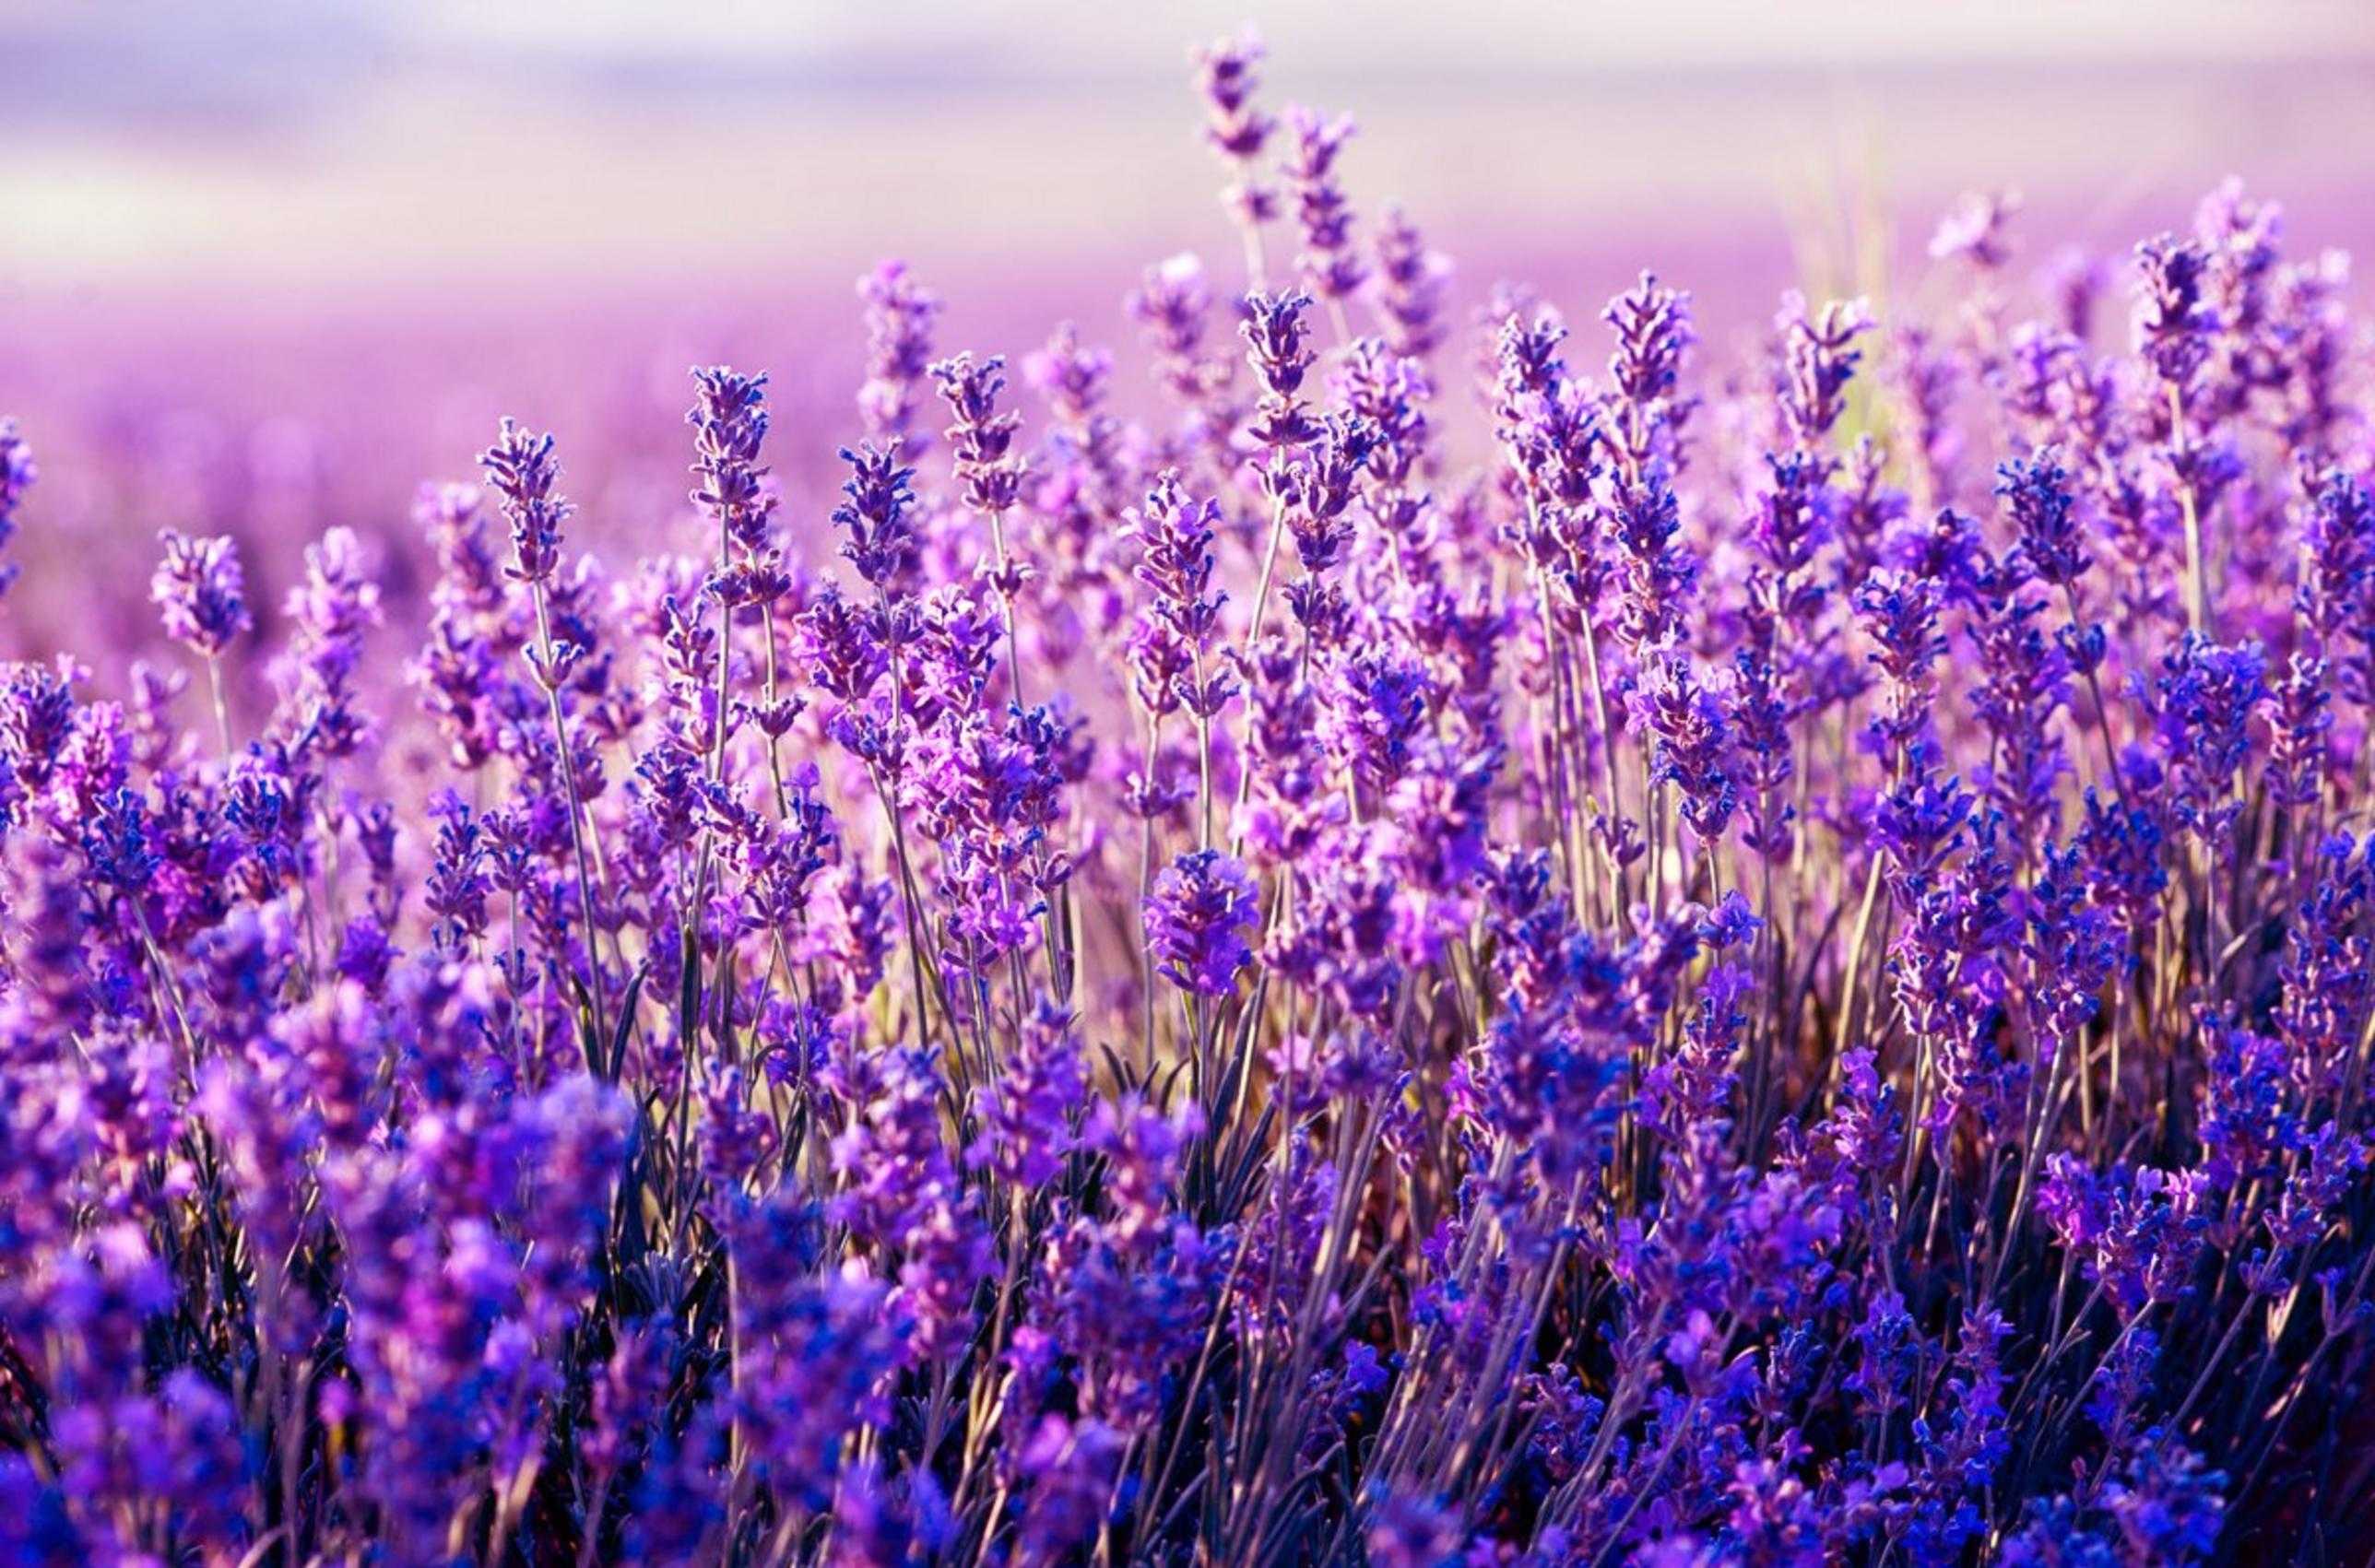 Iphone Wallpaper Lavender Images  Free Photos PNG Stickers Wallpapers   Backgrounds  rawpixel